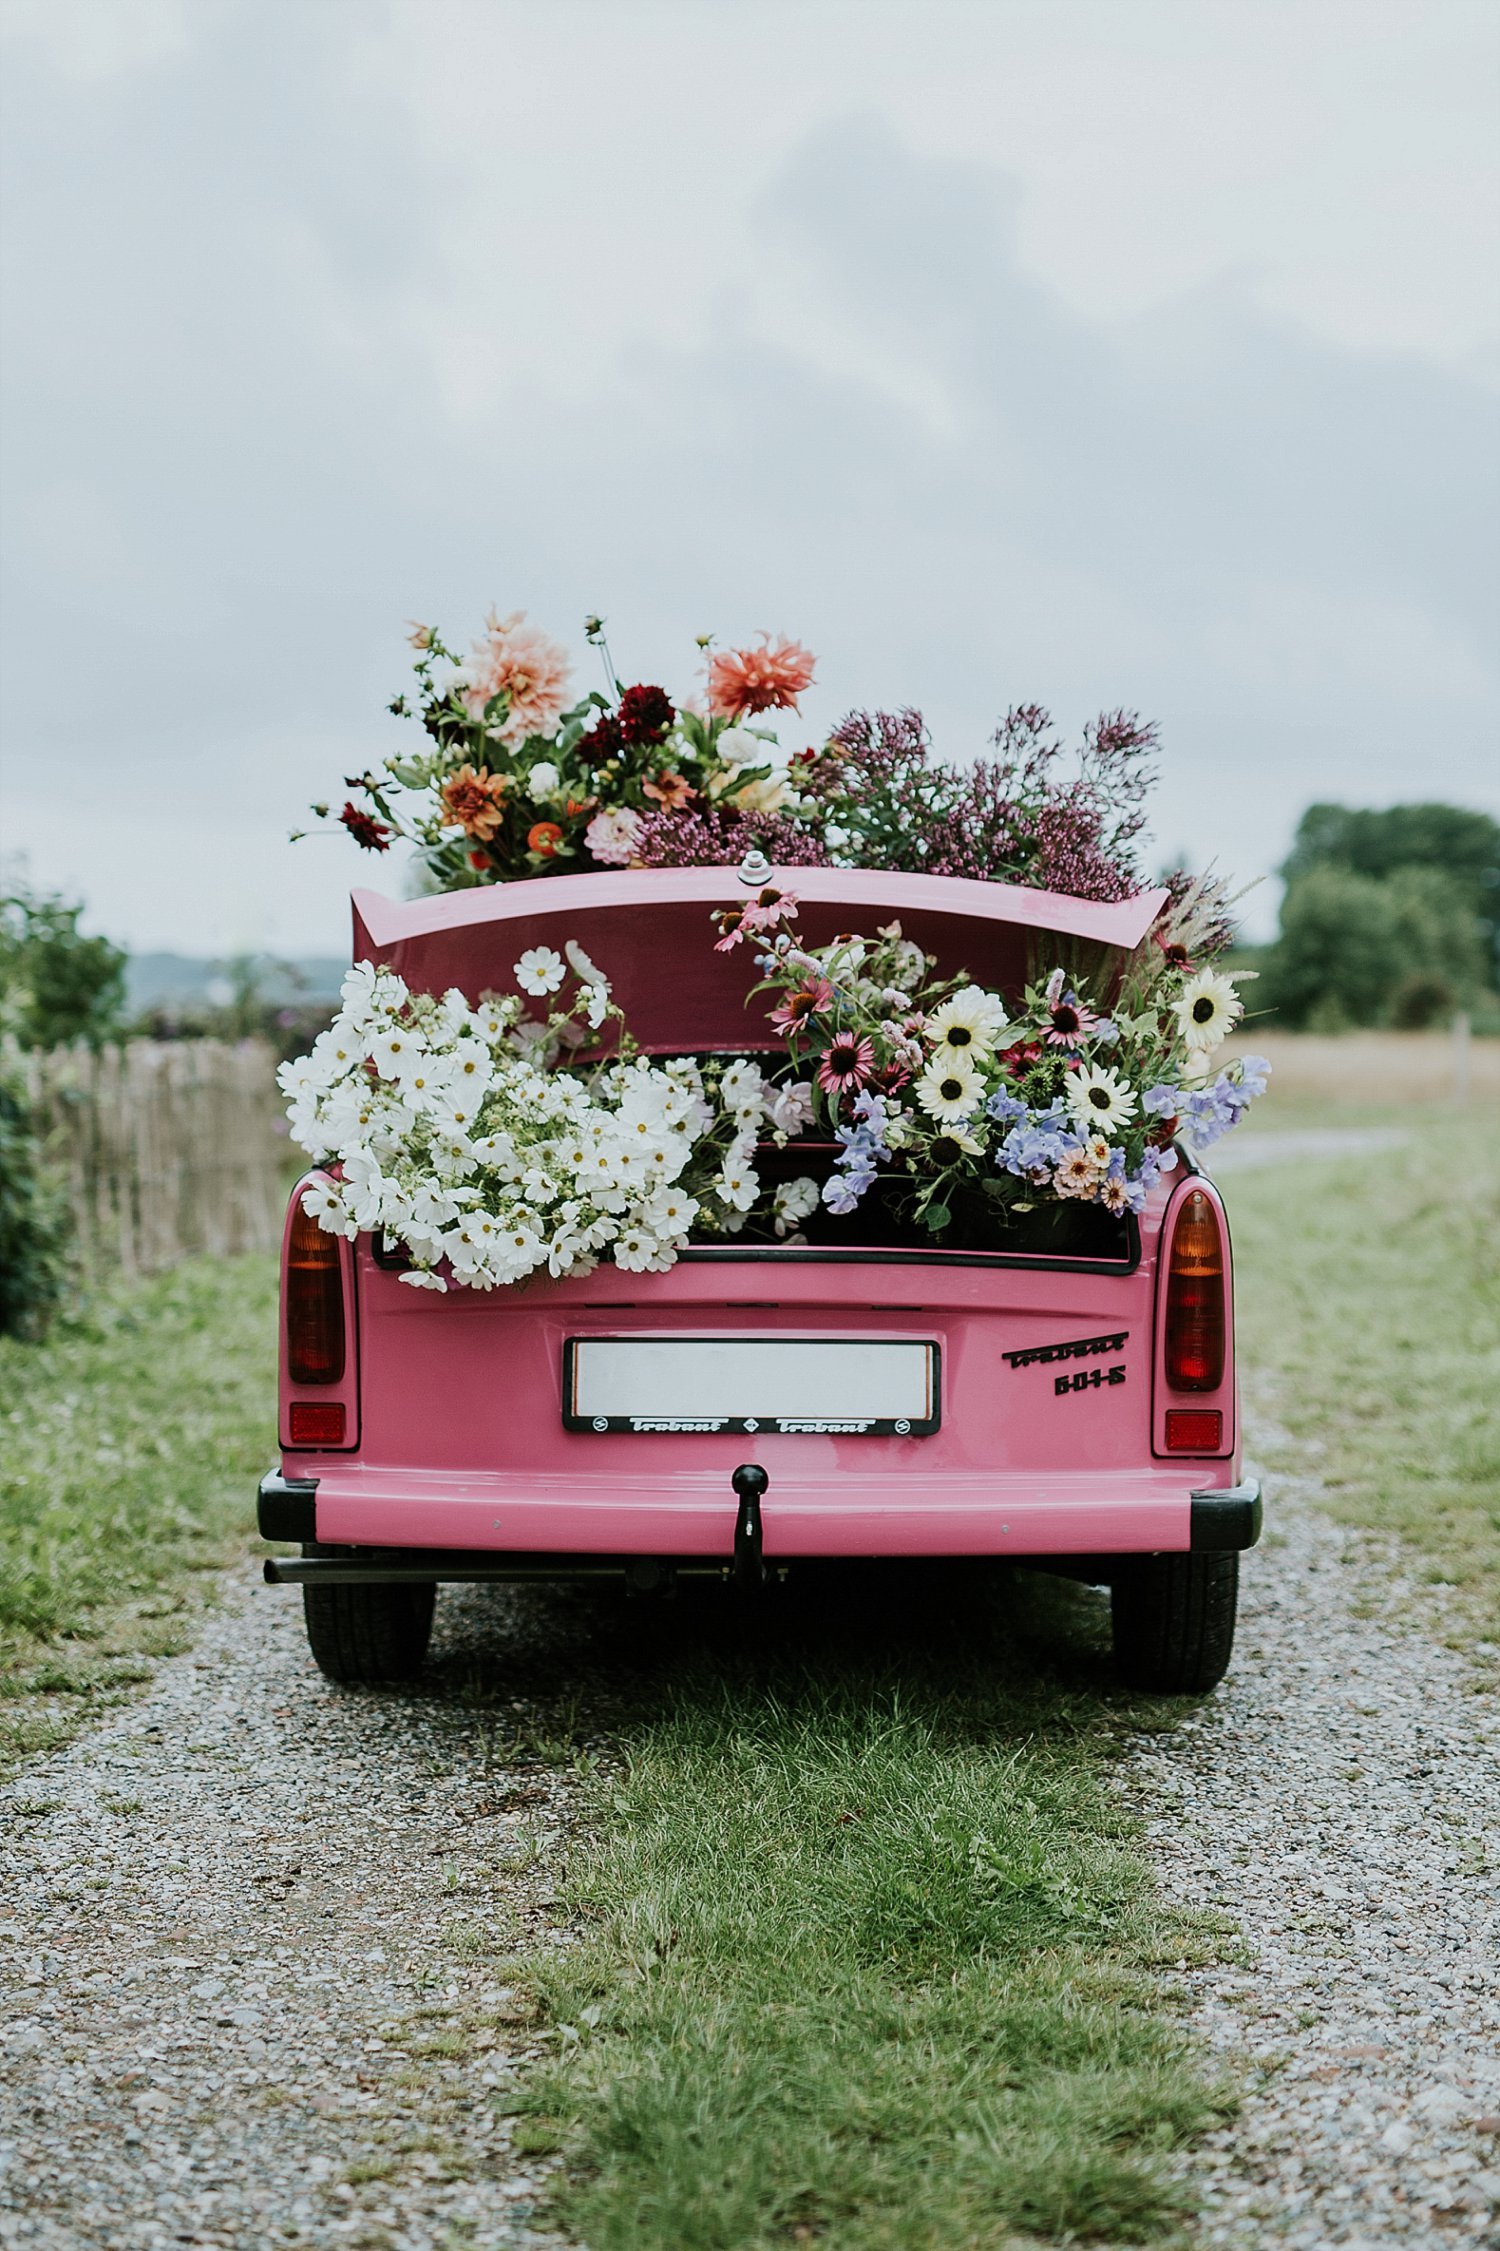 pink car with fresh flowers on top and in trunk | Get married abroad | Danish Island Weddings | Full service Denmark wedding planners